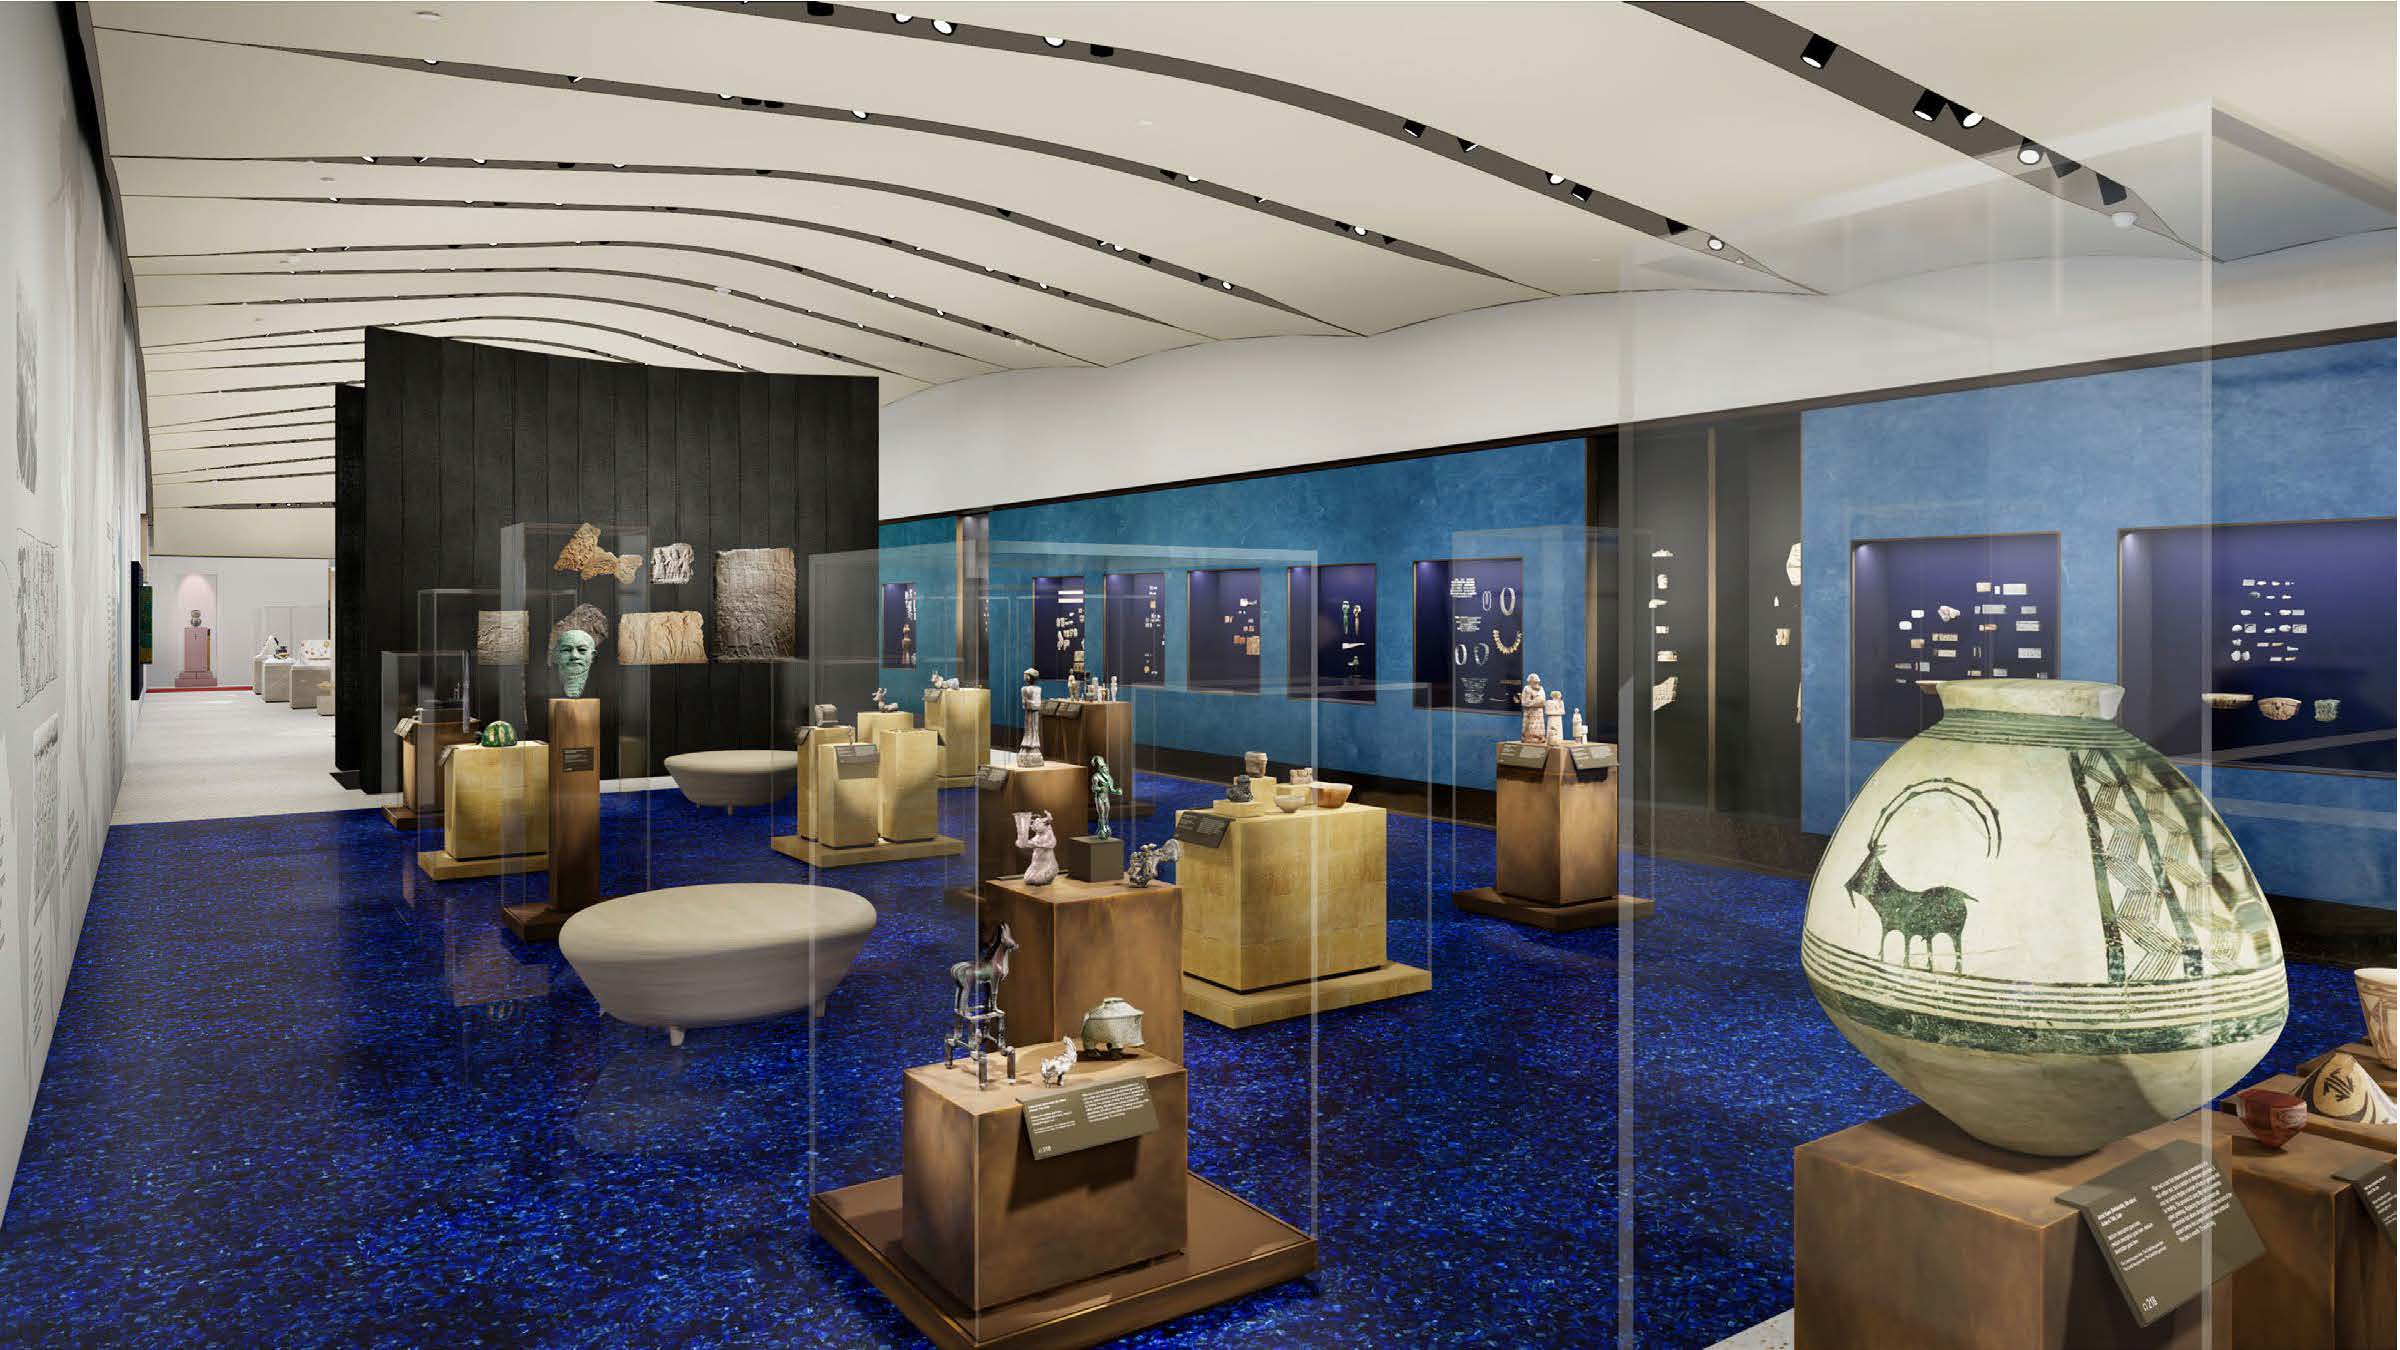 Rendering of gallery space with blue carpet and blue walls with objects in glass cases.